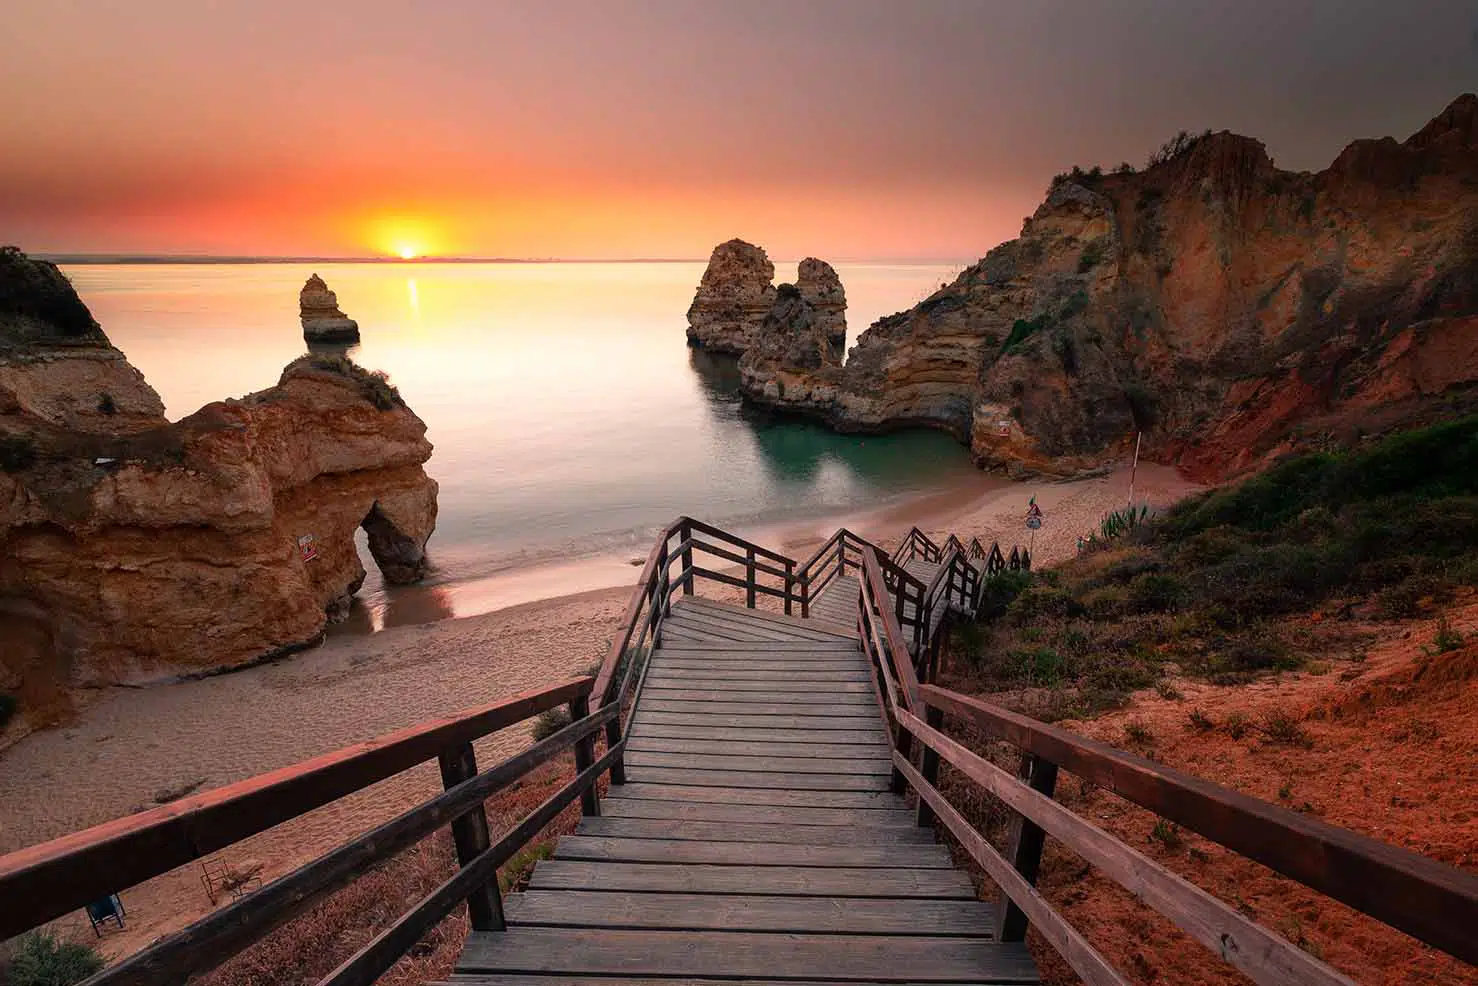 Coves-and-cliffs-at-Ponta-da-Piedade-the-most-famous-spot-of-Algarve-region-in-Portugal.jpg